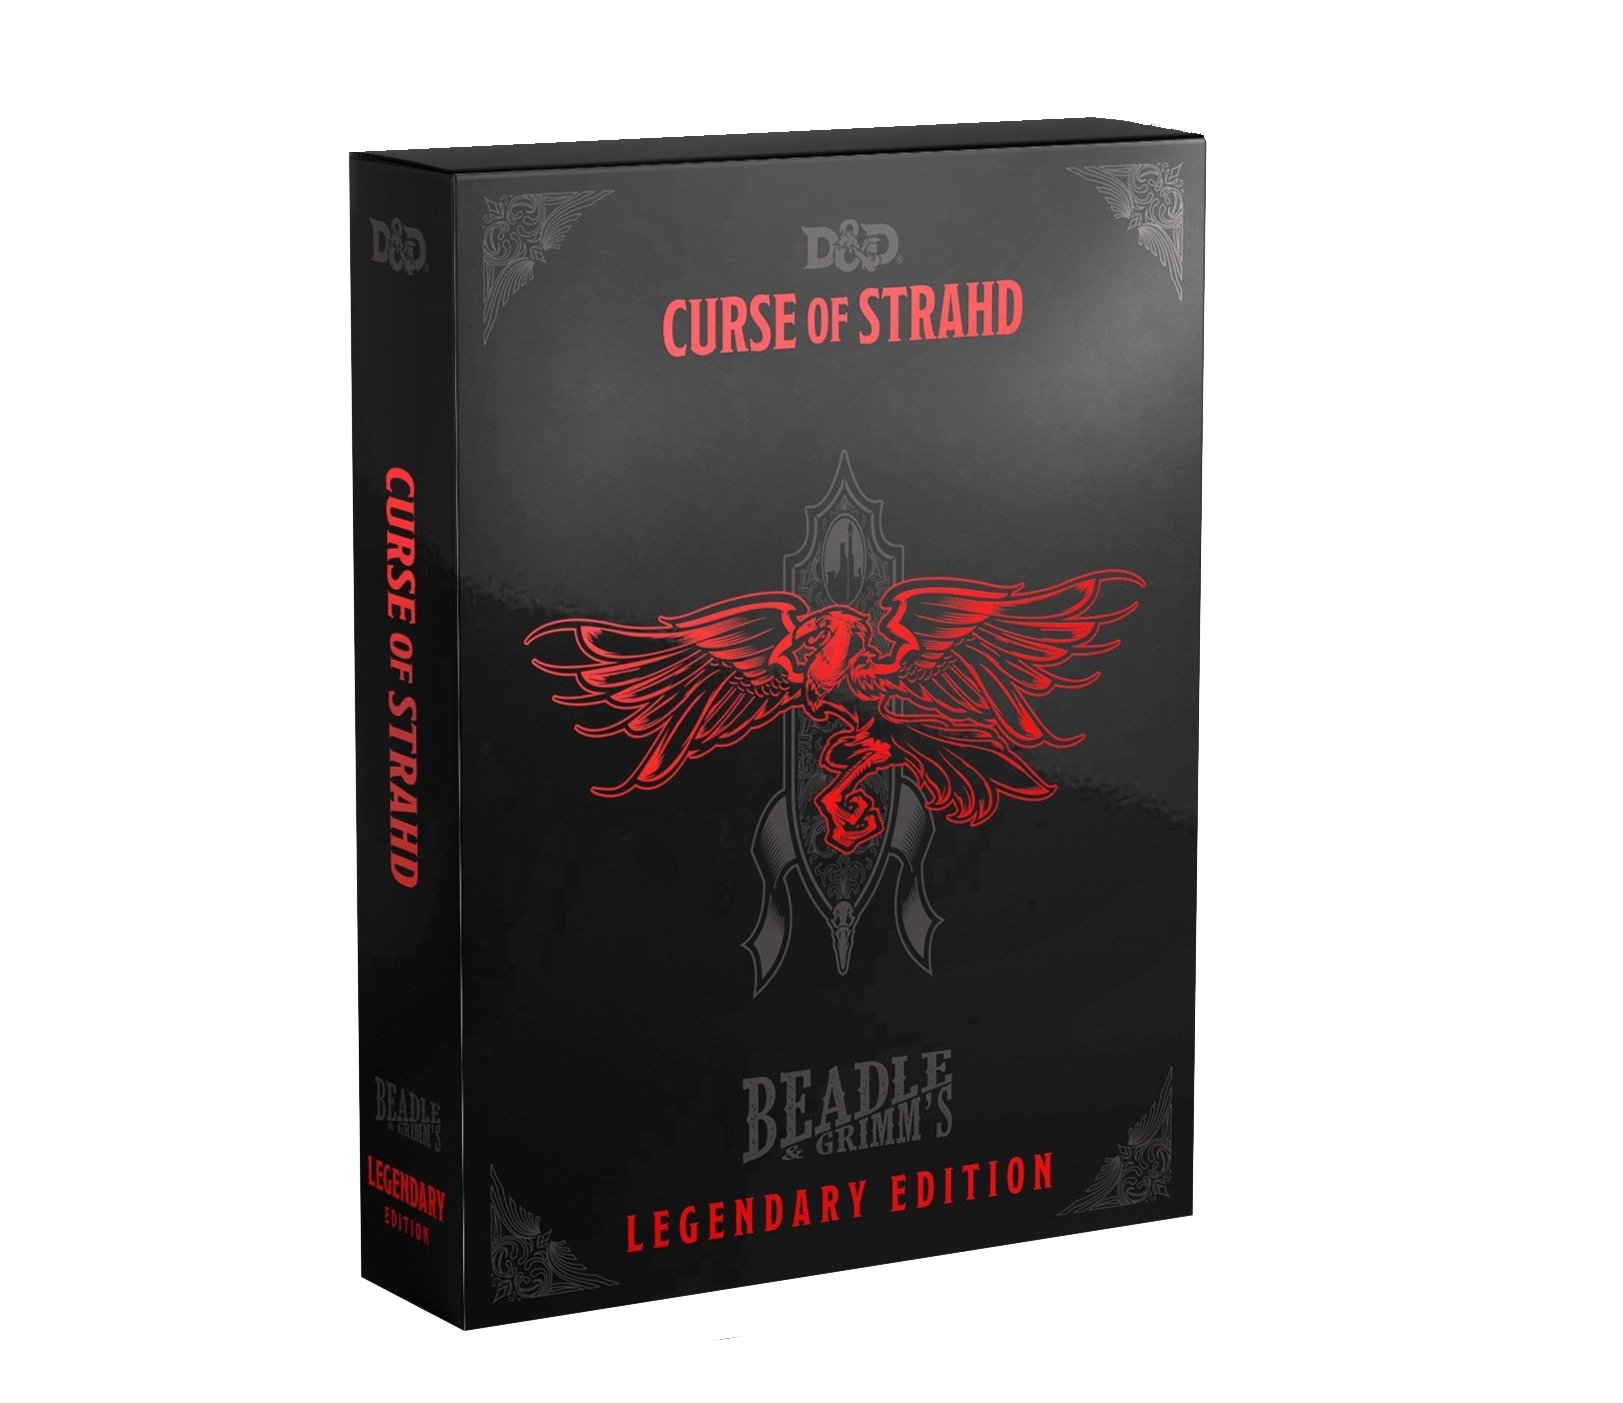 Legendary Edition of Curse of Strahd from Beadle & Grimm's